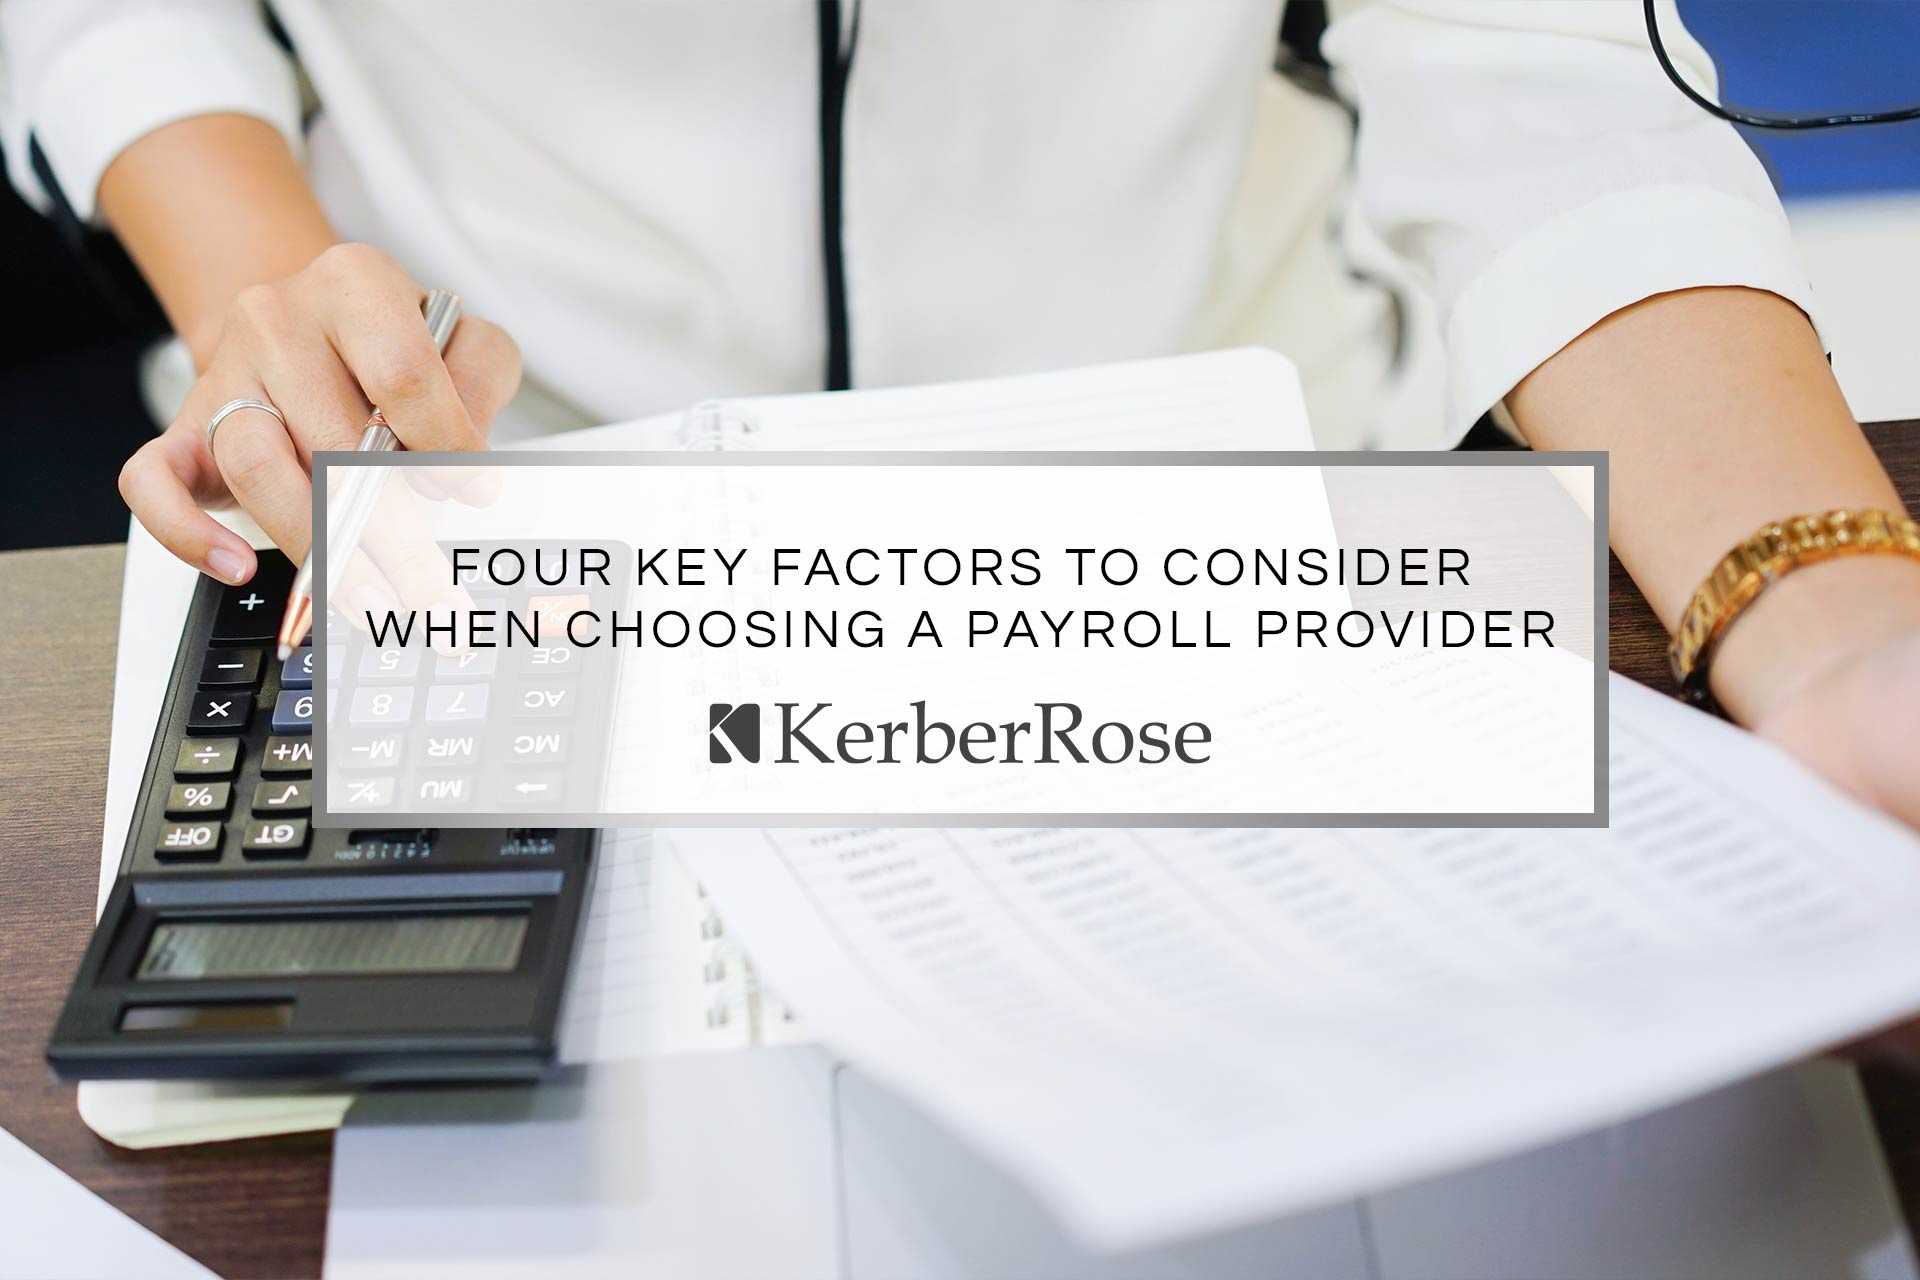 Four Key Factors to Consider When Choosing a Payroll Provider